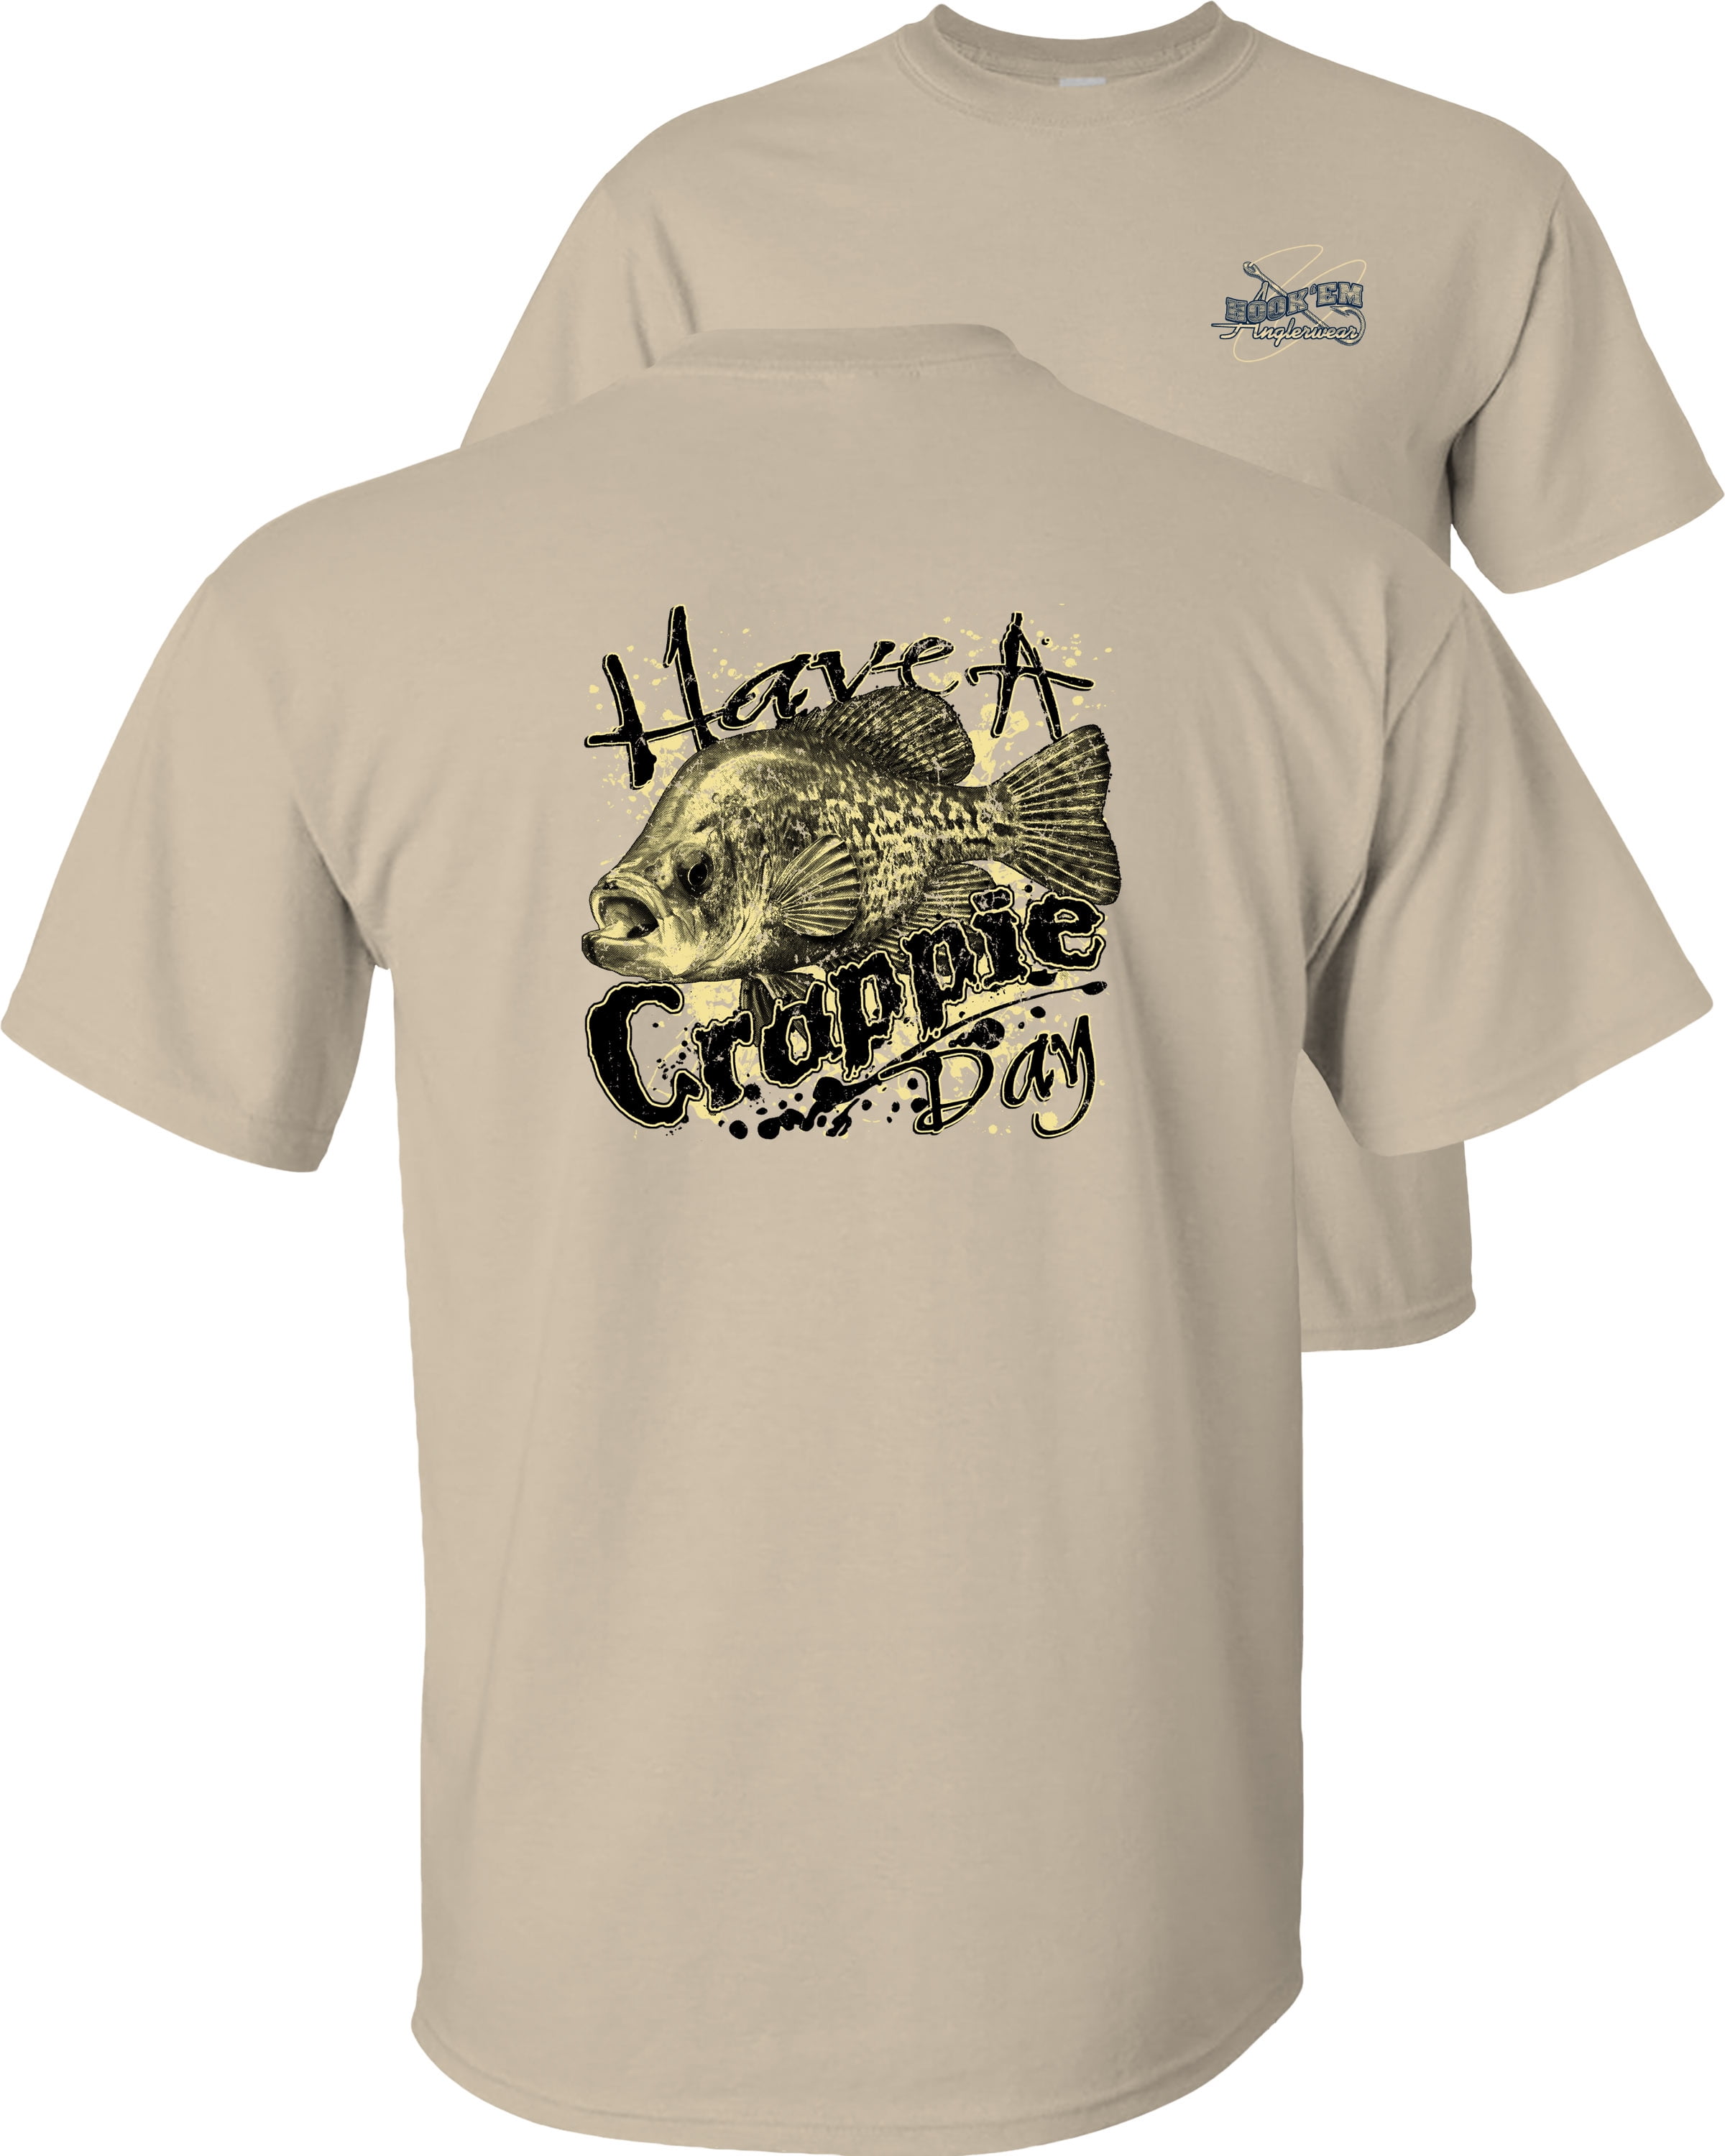 Fair Game Have a Crappie Day T-Shirt, Fishing Graphic Tee-Ice Grey-M 